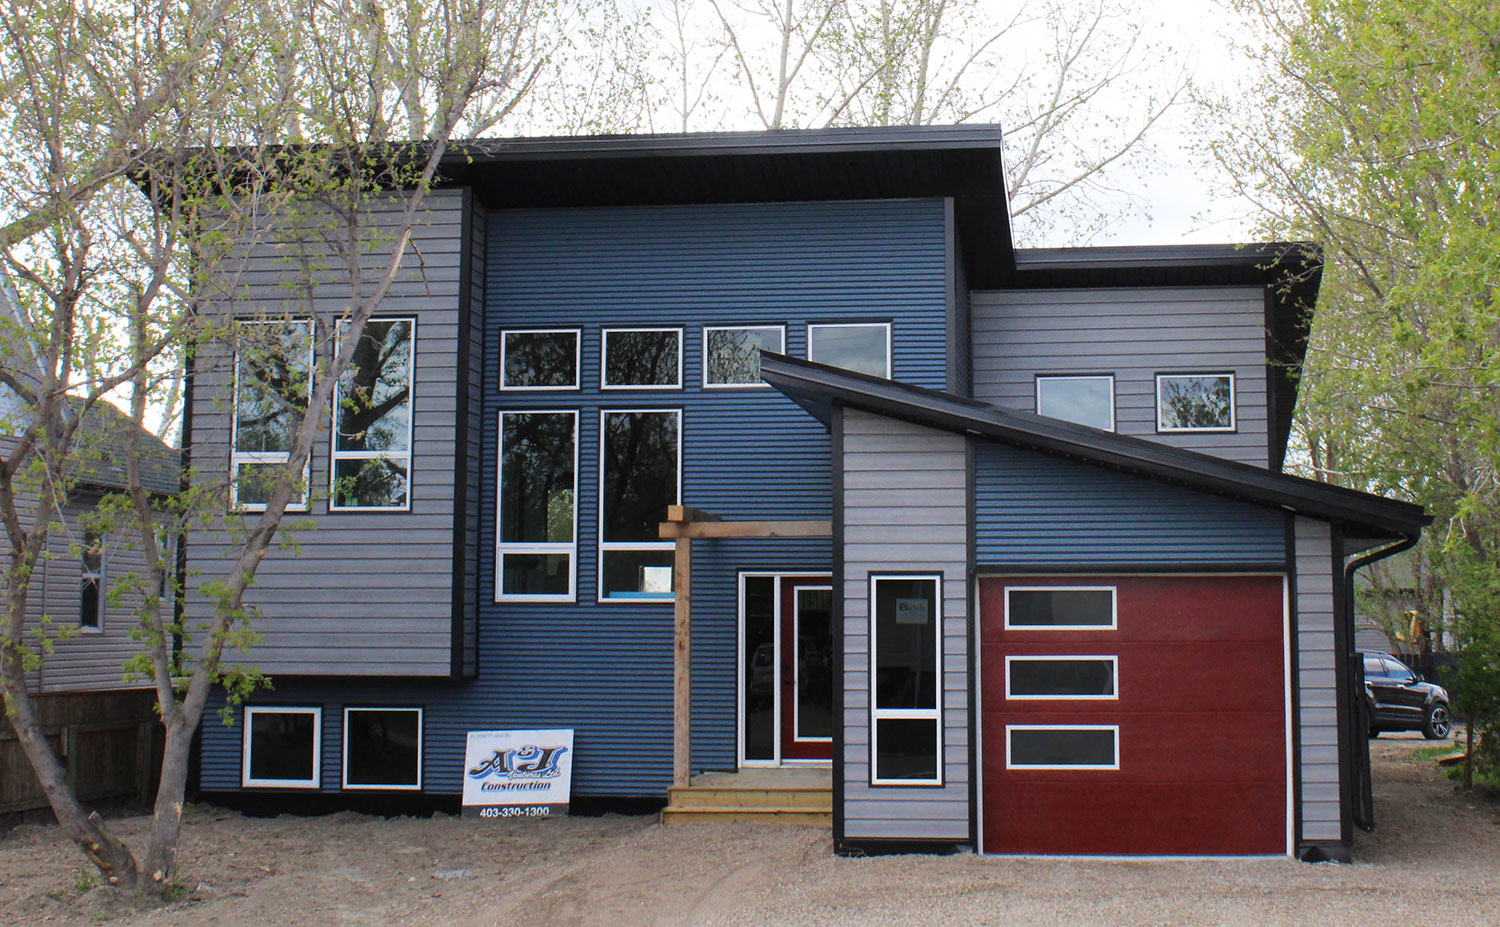 Residential Building with 7/8 Corrugated Oxford Blue Panel and Barnboard Woodgrain